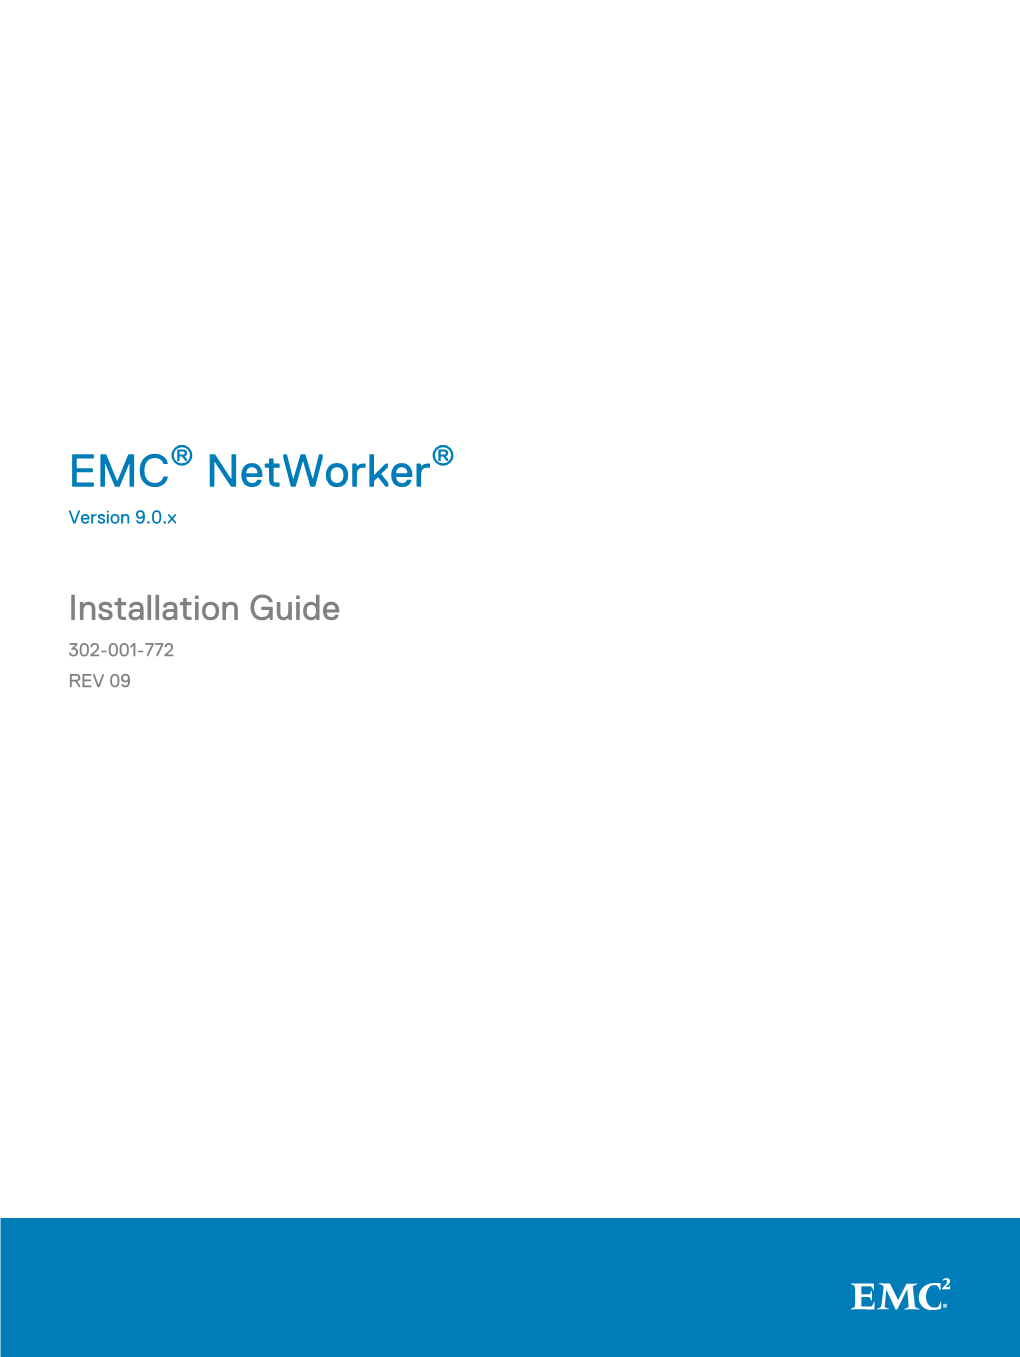 EMC Networker 9.0.X Installation Guide CONTENTS